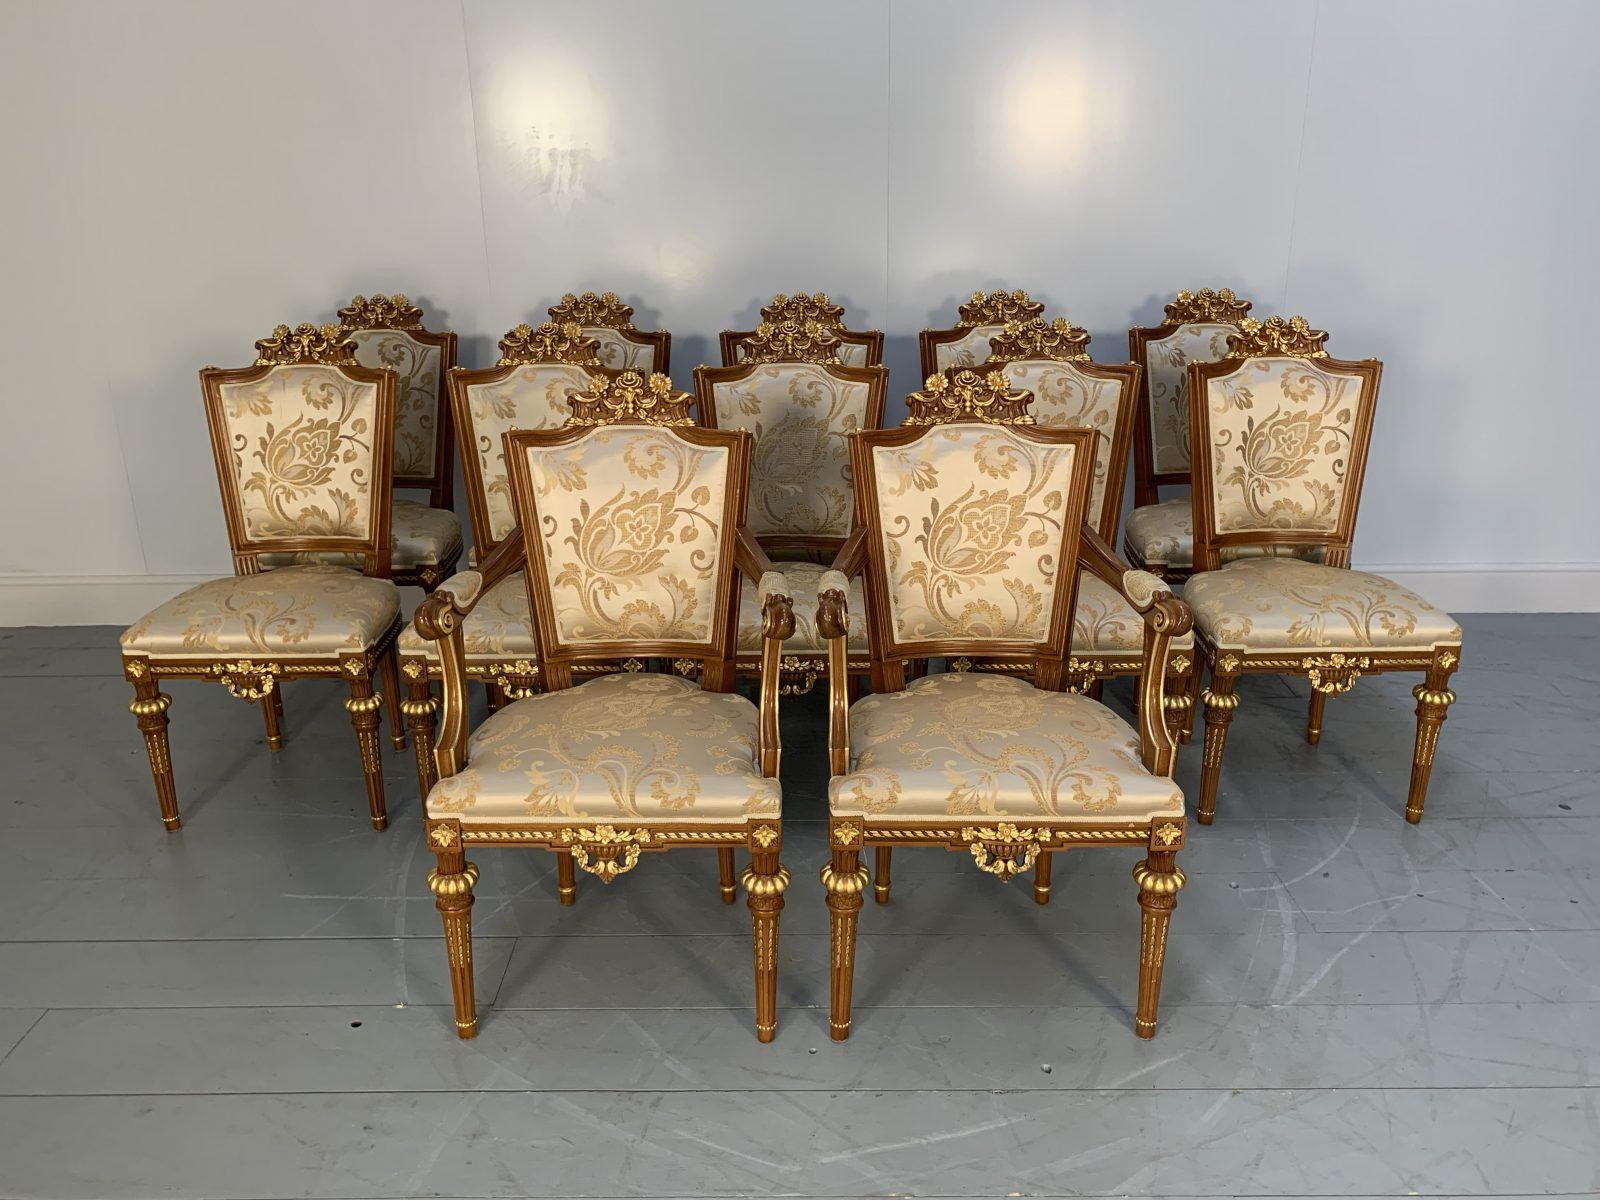 Contemporary Asnaghi “Eubea” Dining Table and 12 Chair Suite in Harwood, Gilt and Silk For Sale